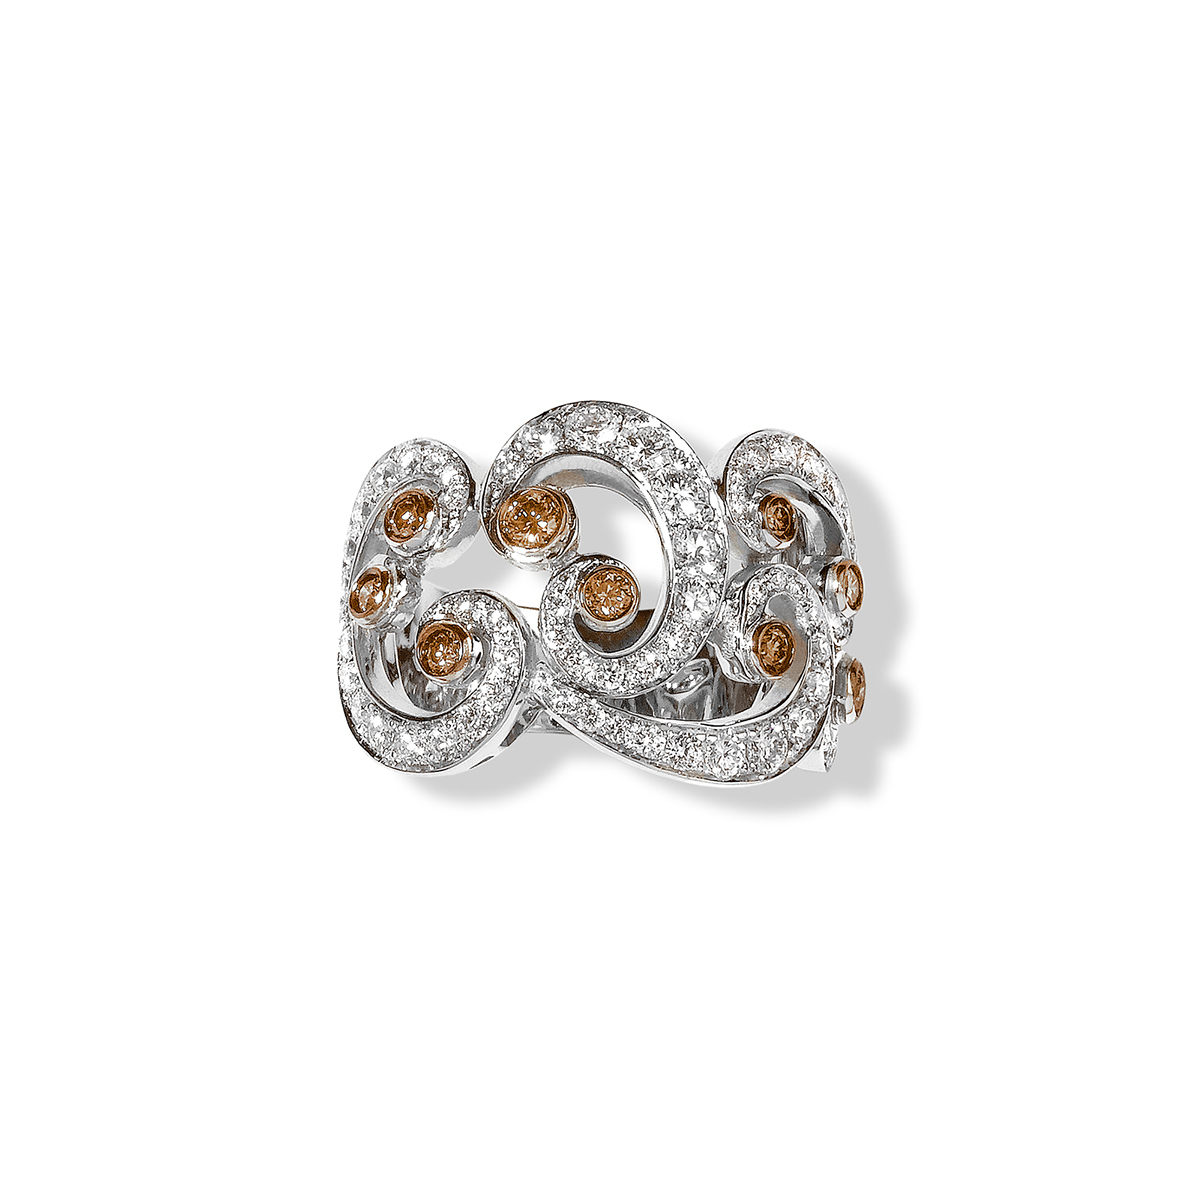 Indian Style Cognac and White Diamond Ring in 18 K White Gold 